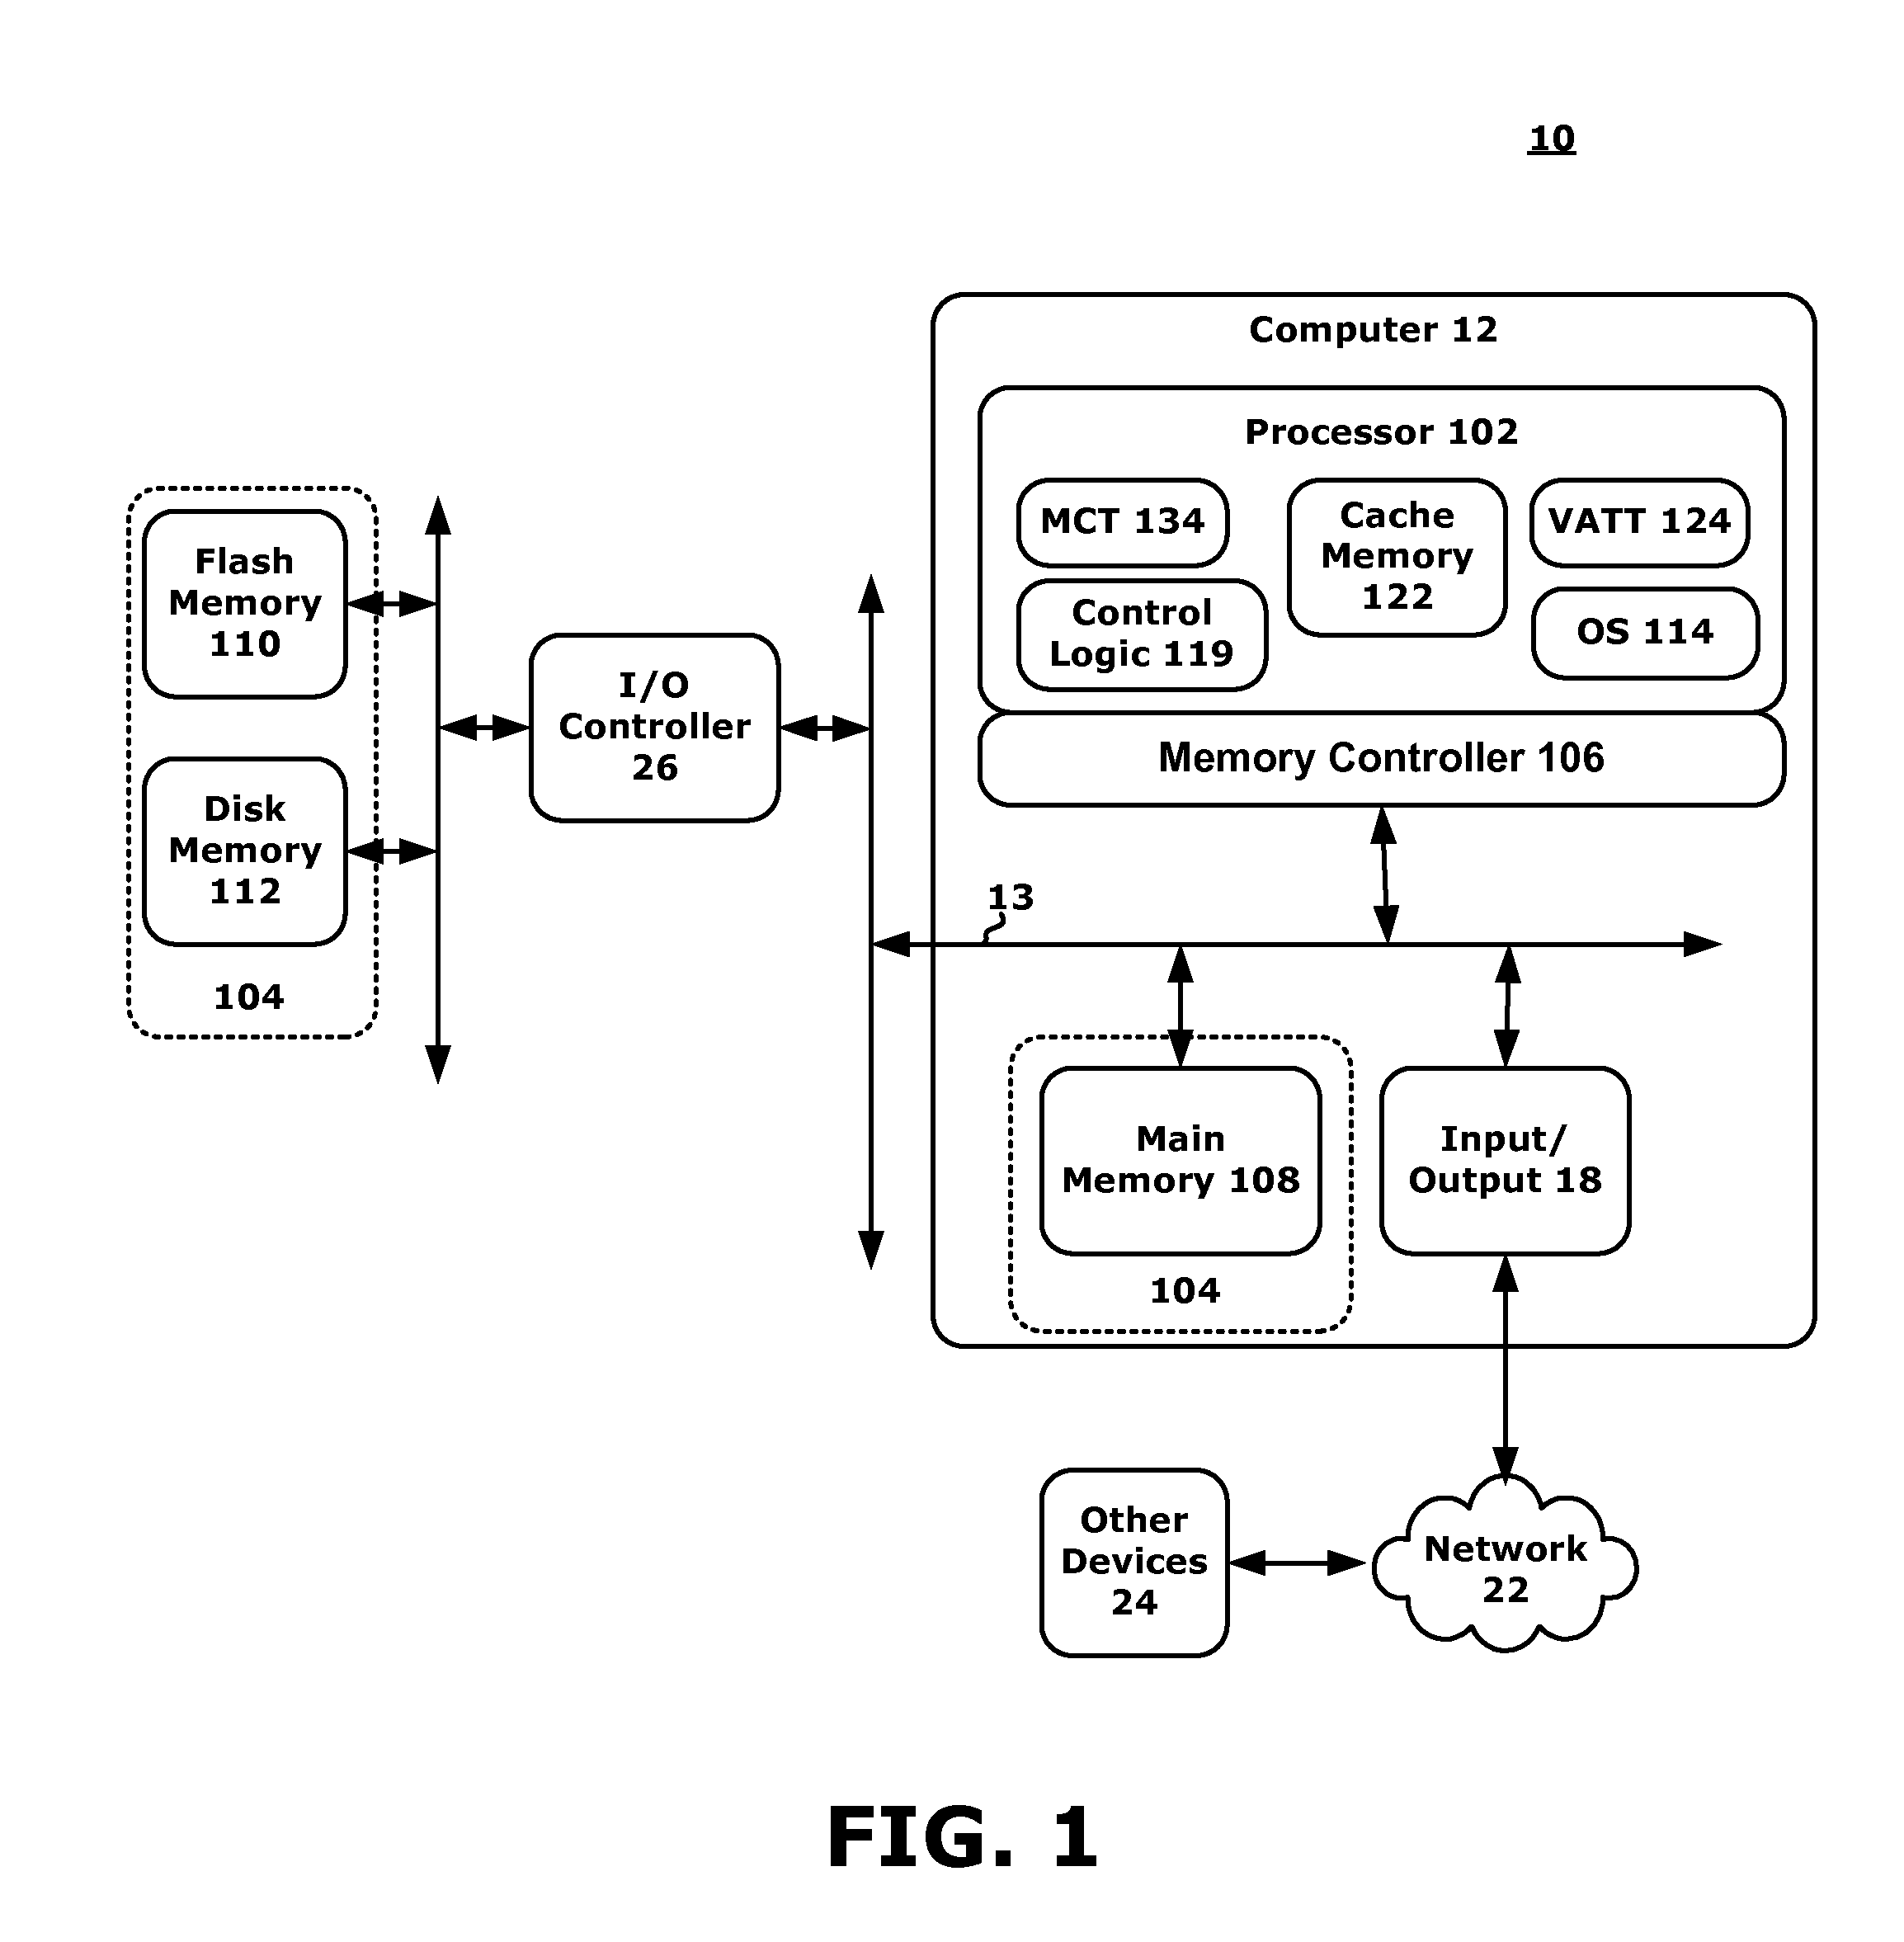 Memory Architecture with Policy Based Data Storage